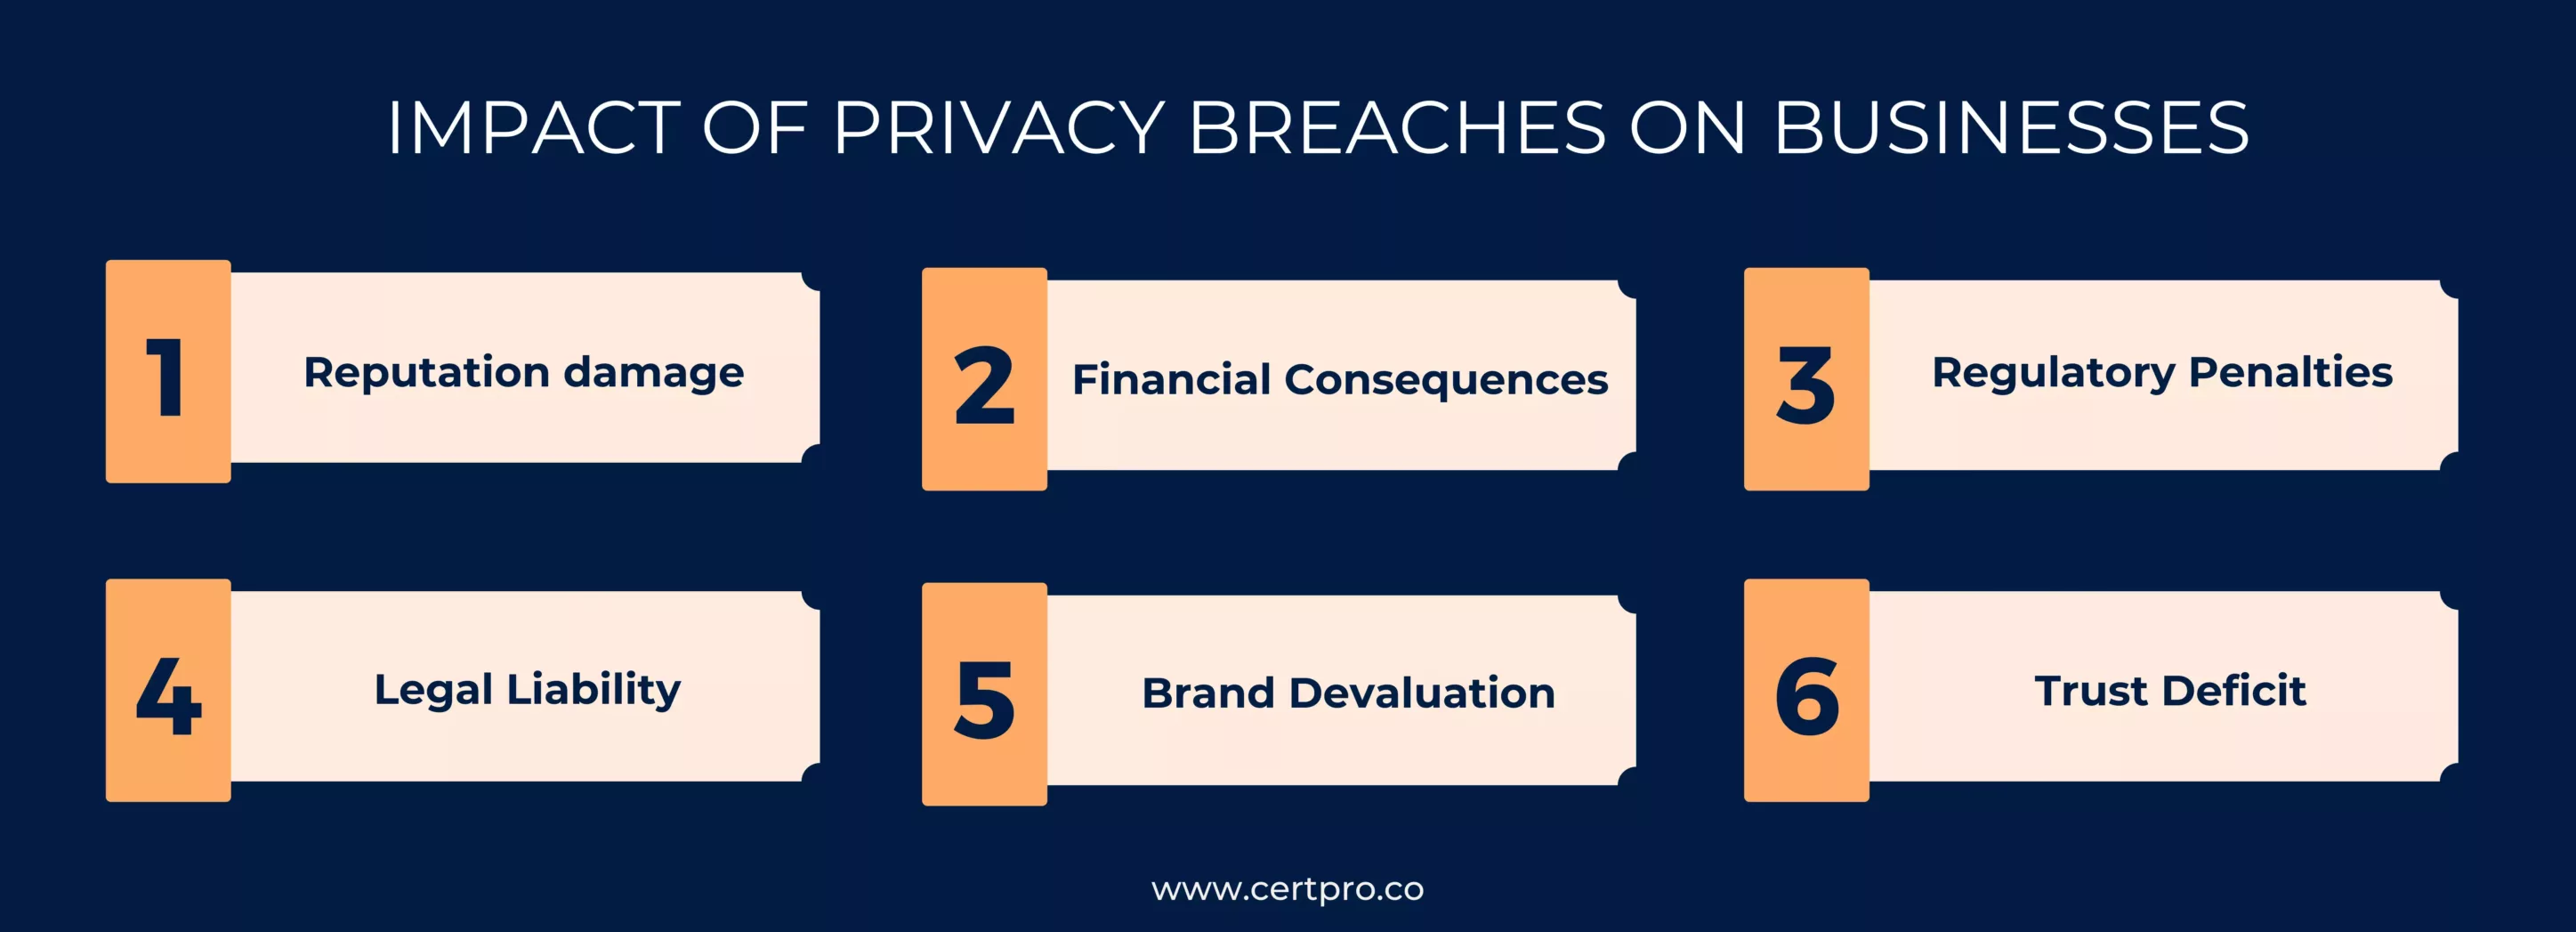 Impact of privacy breaches on businesses